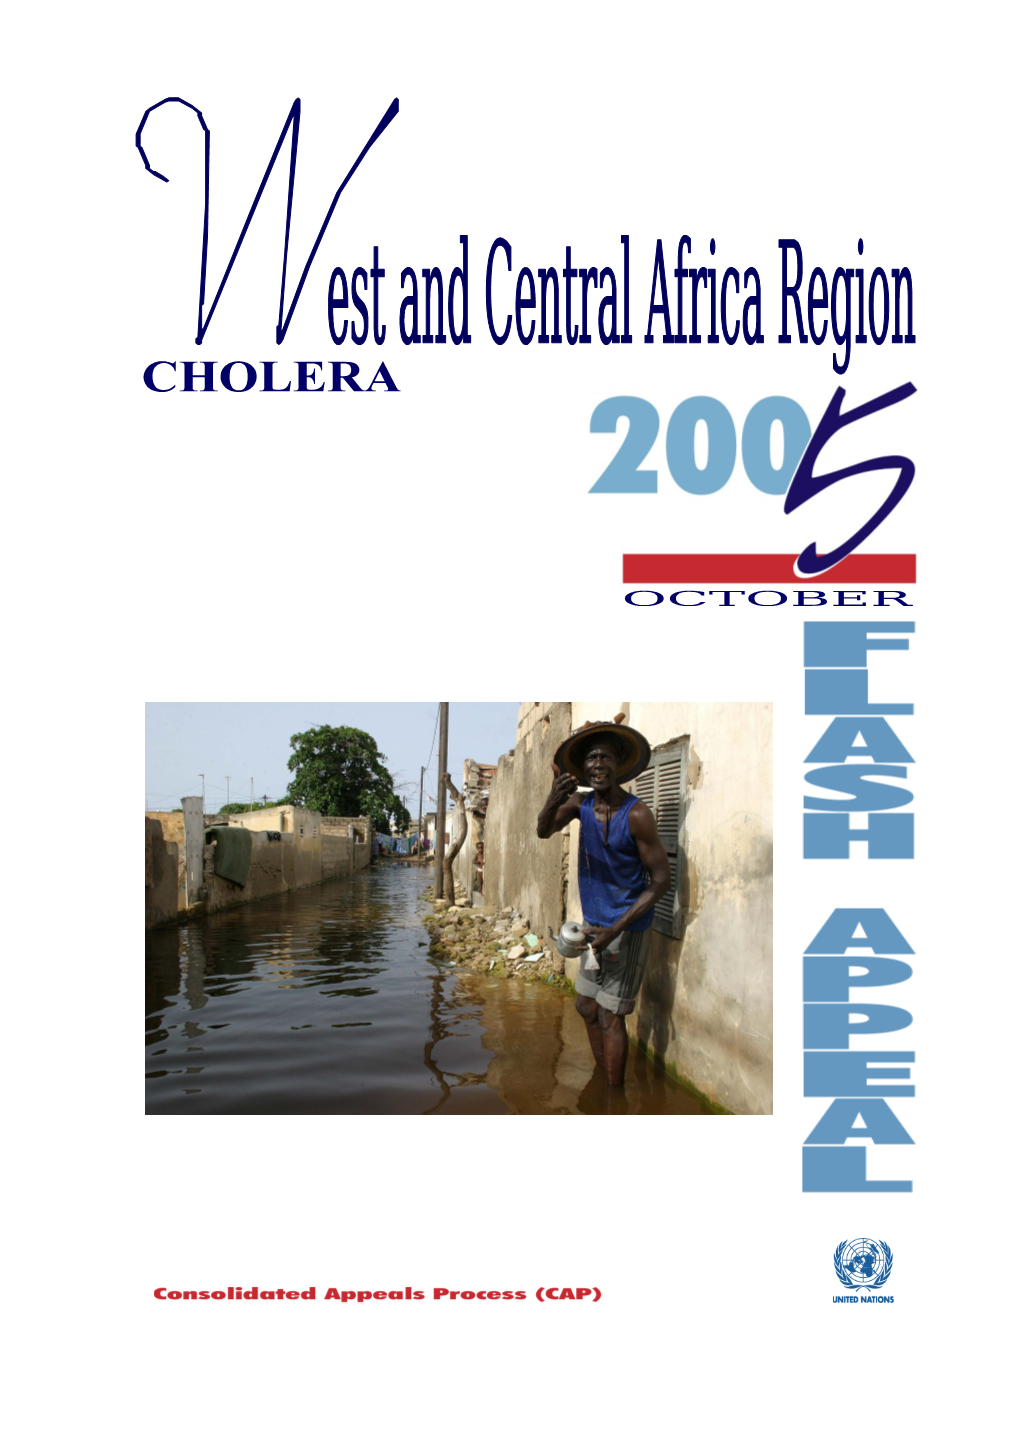 West and Central Africa 2005 - Cholera Flash Appeal (Word)